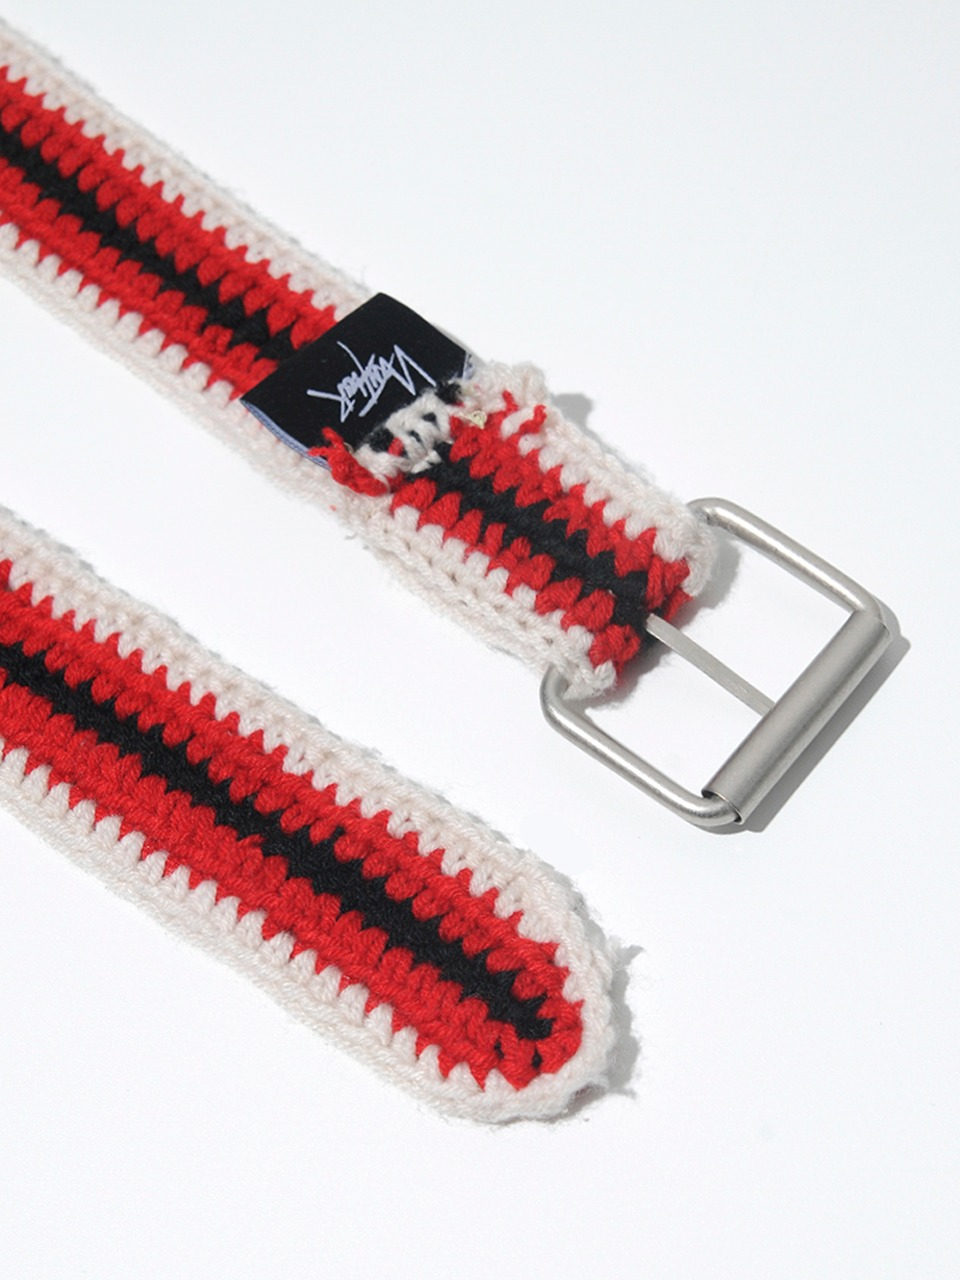 NON FLOOR - MULTI COLOR KNITTED BELT (RED)